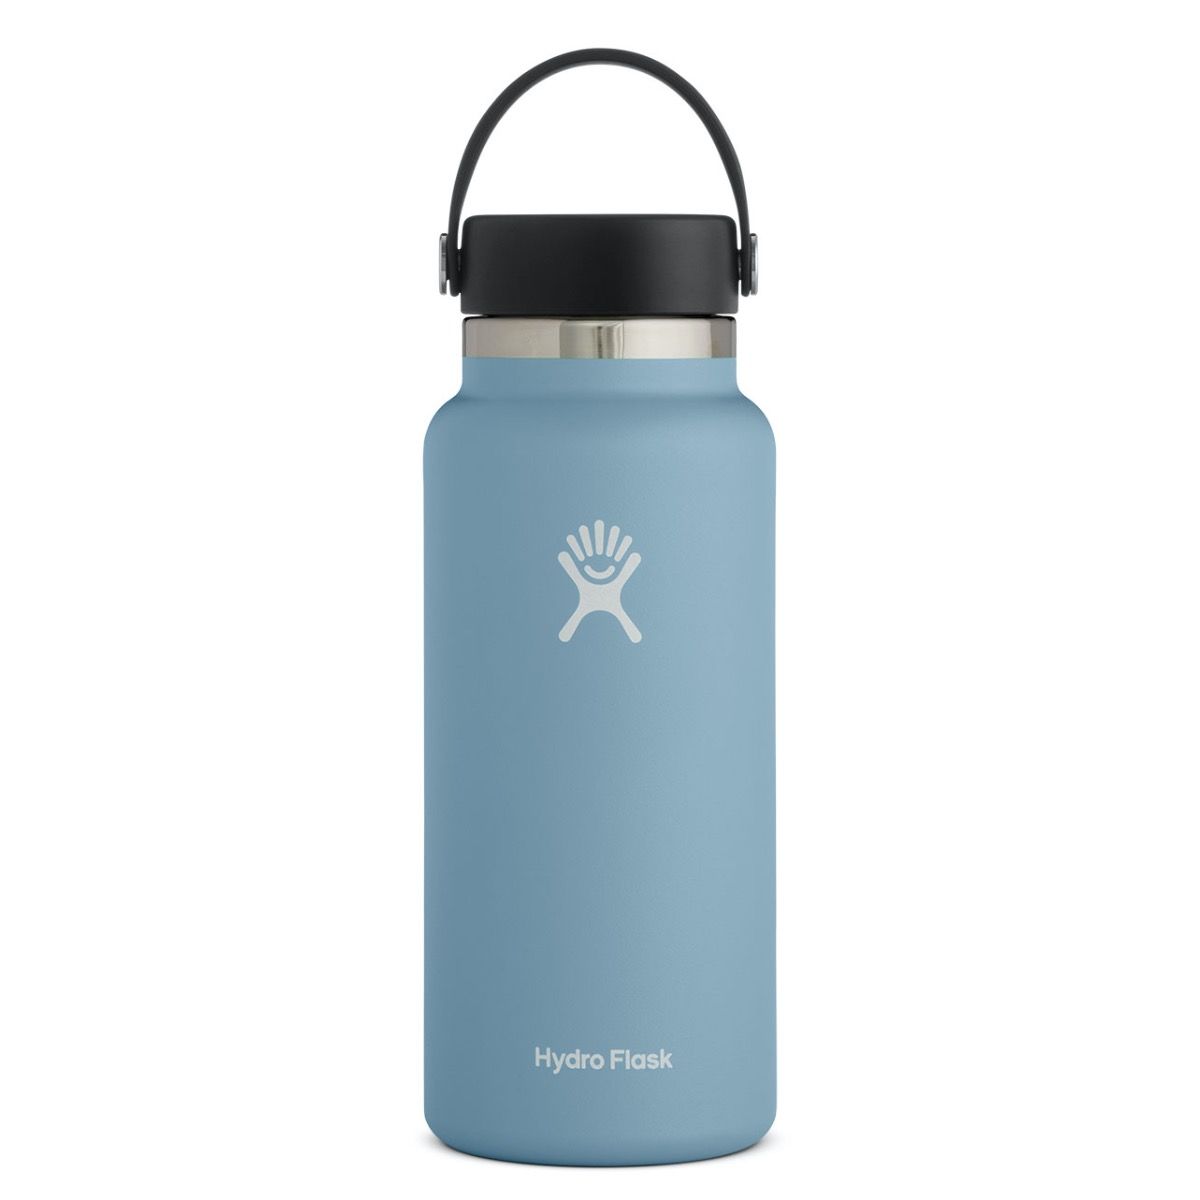 Hydro Flask Insulated Wide Mouth 32 oz Water Bottle with Flex Lid - NEW